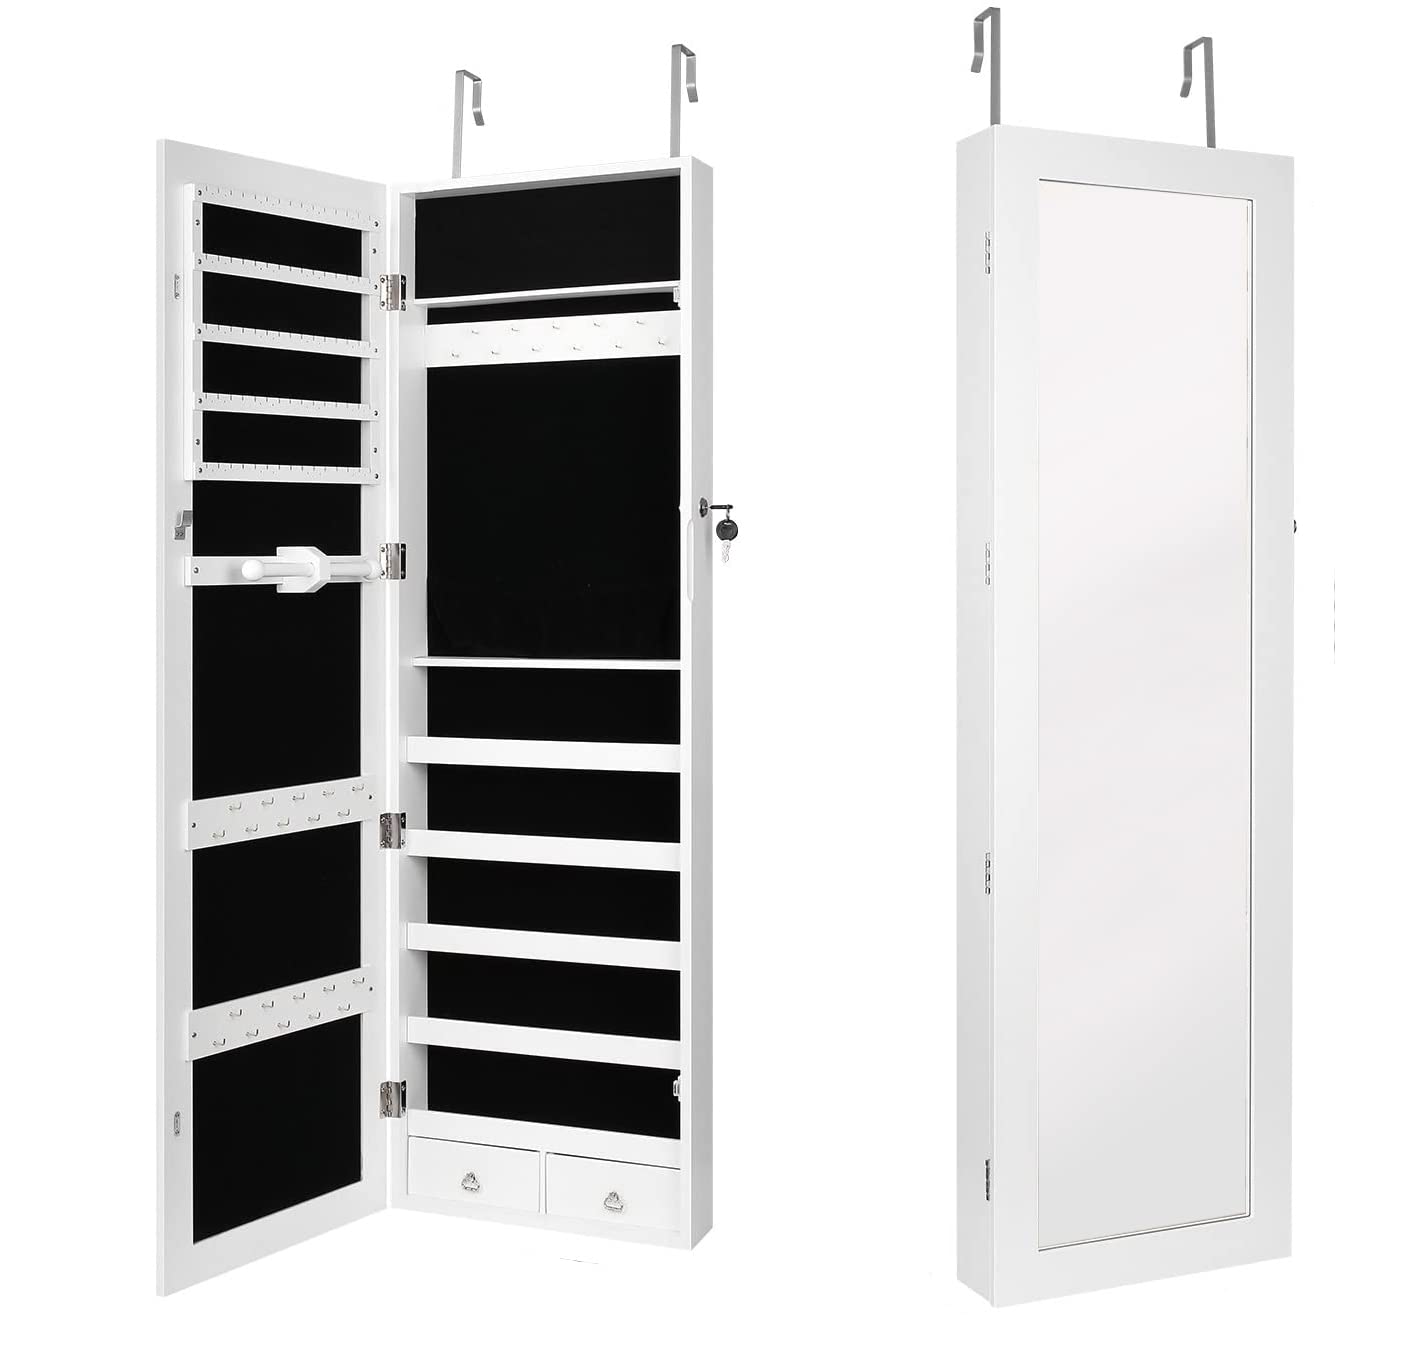 Jewelry Cabinet, Full-Length Mirror Cabinet with Lock, Over Door Hanging Jewelry Armoire Organizer with Large Capacity Storage